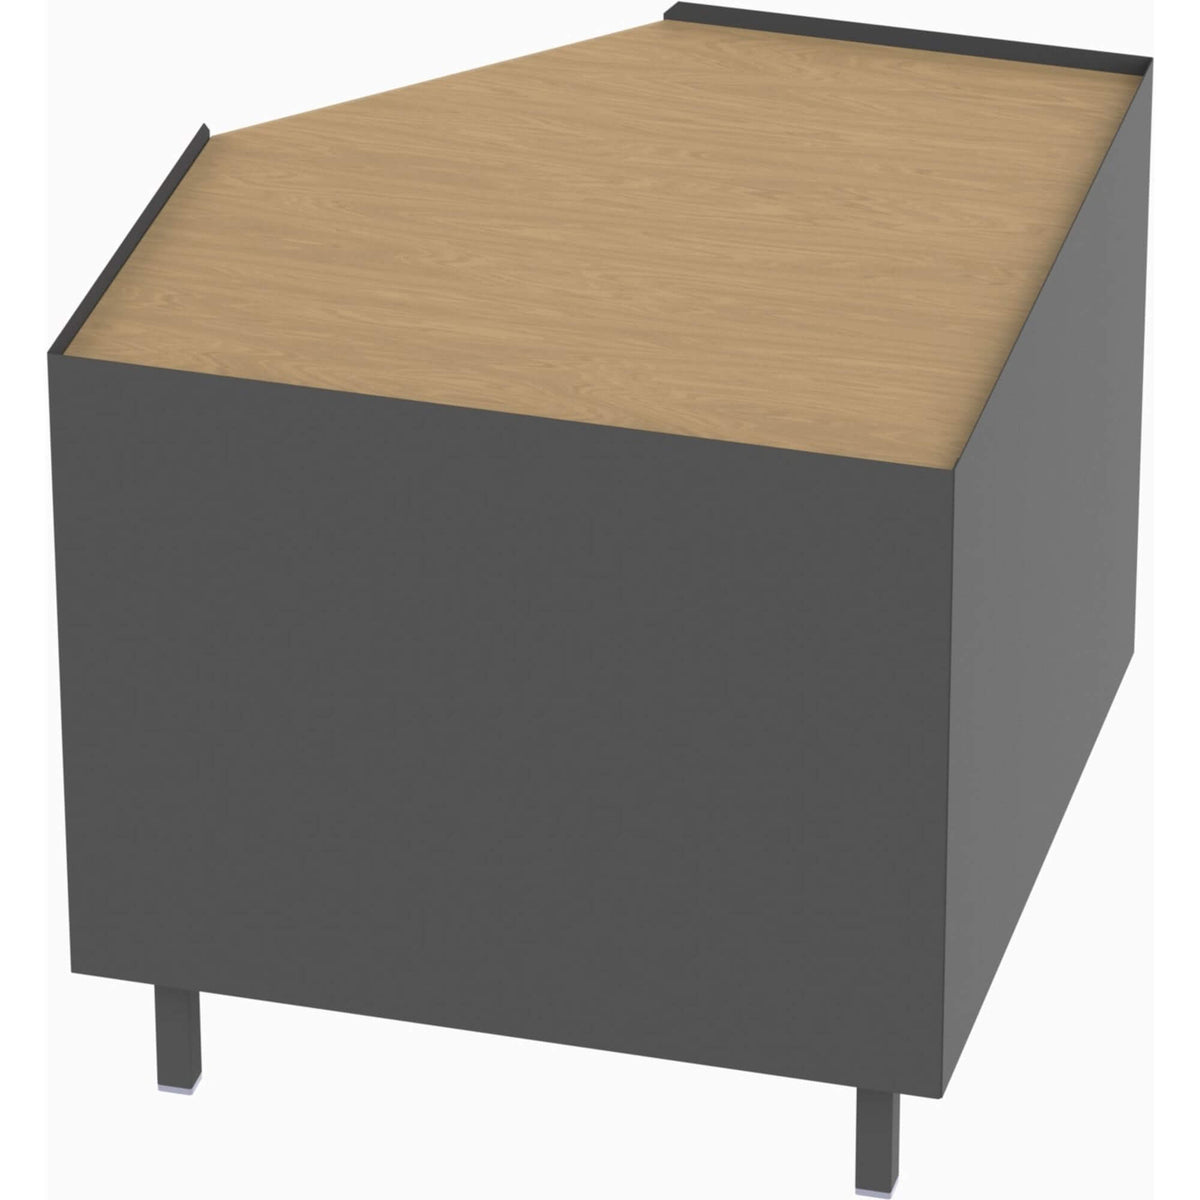 Dim Gray Optional Tops for Workbenches: Butcher Block &amp; Rubber Mat Tops